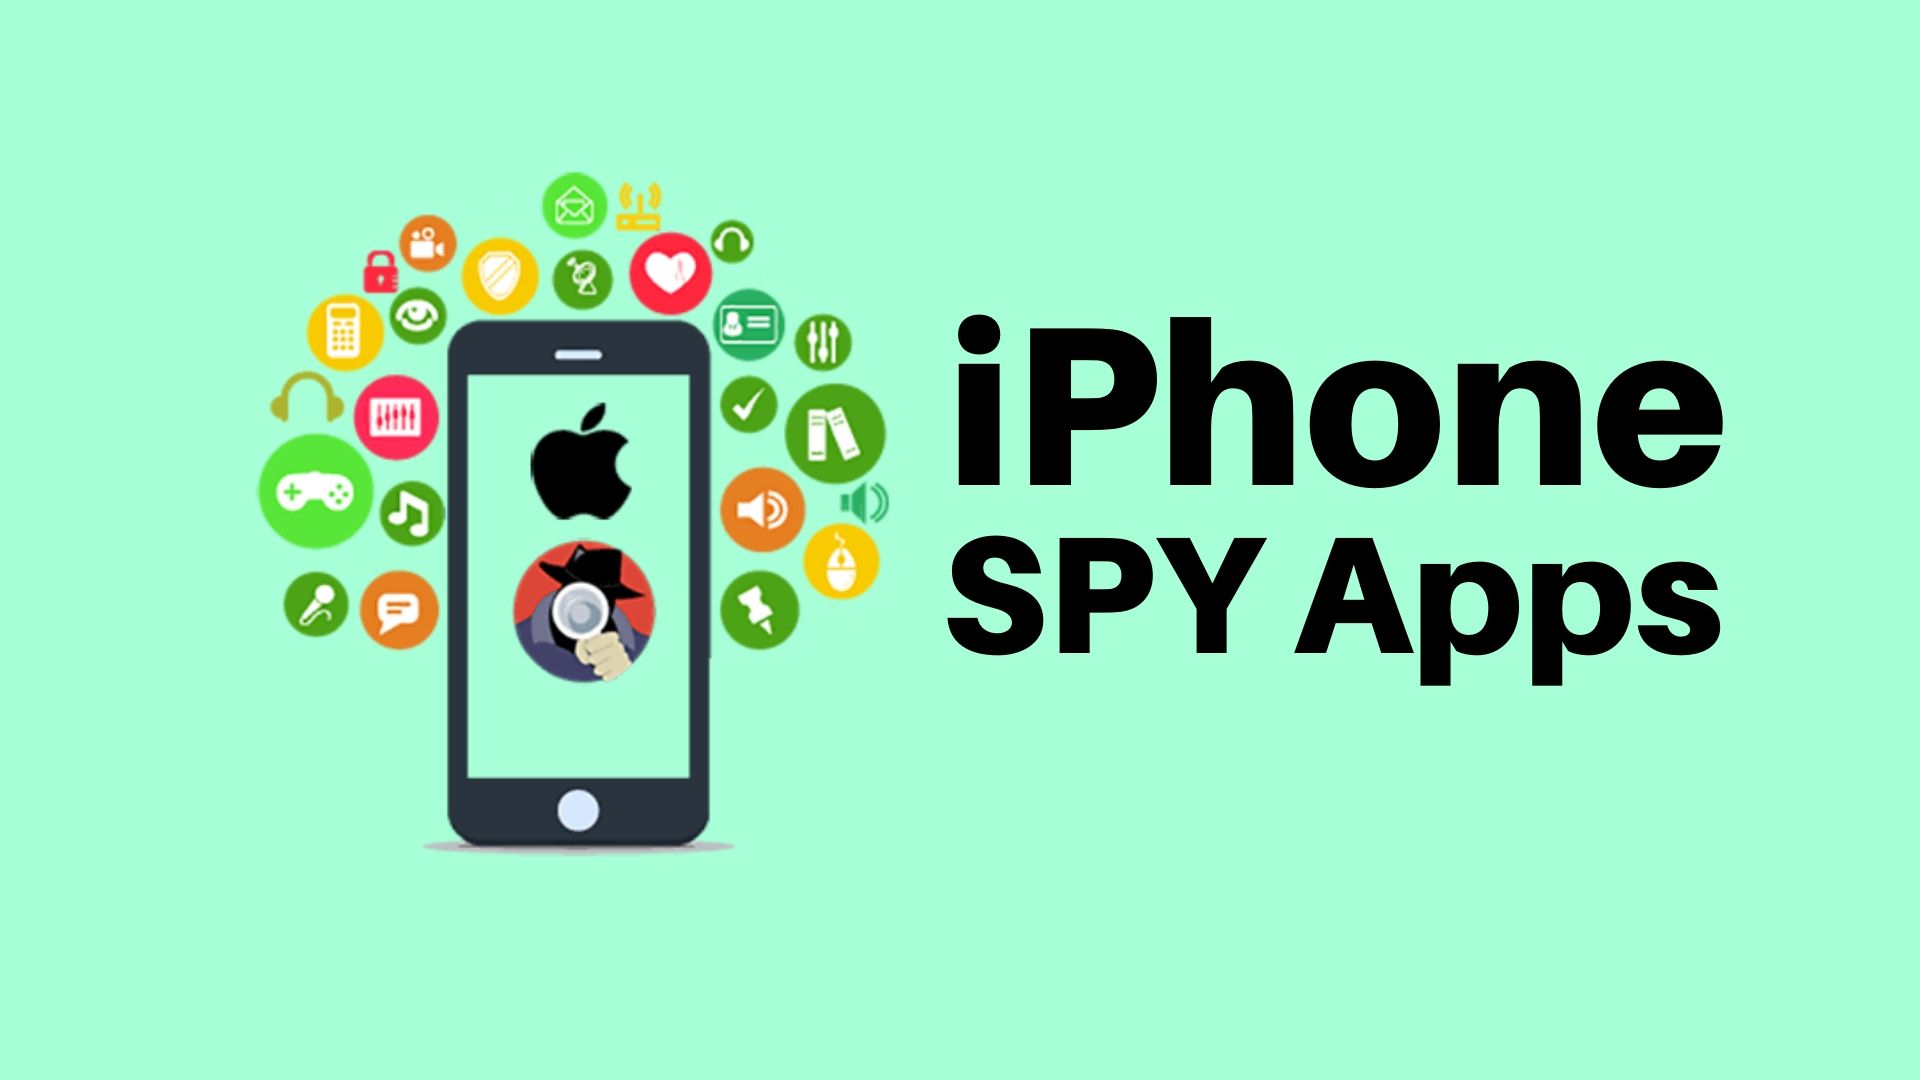 10 Top iPhone Spy Apps to Track Texts, Calls and Location